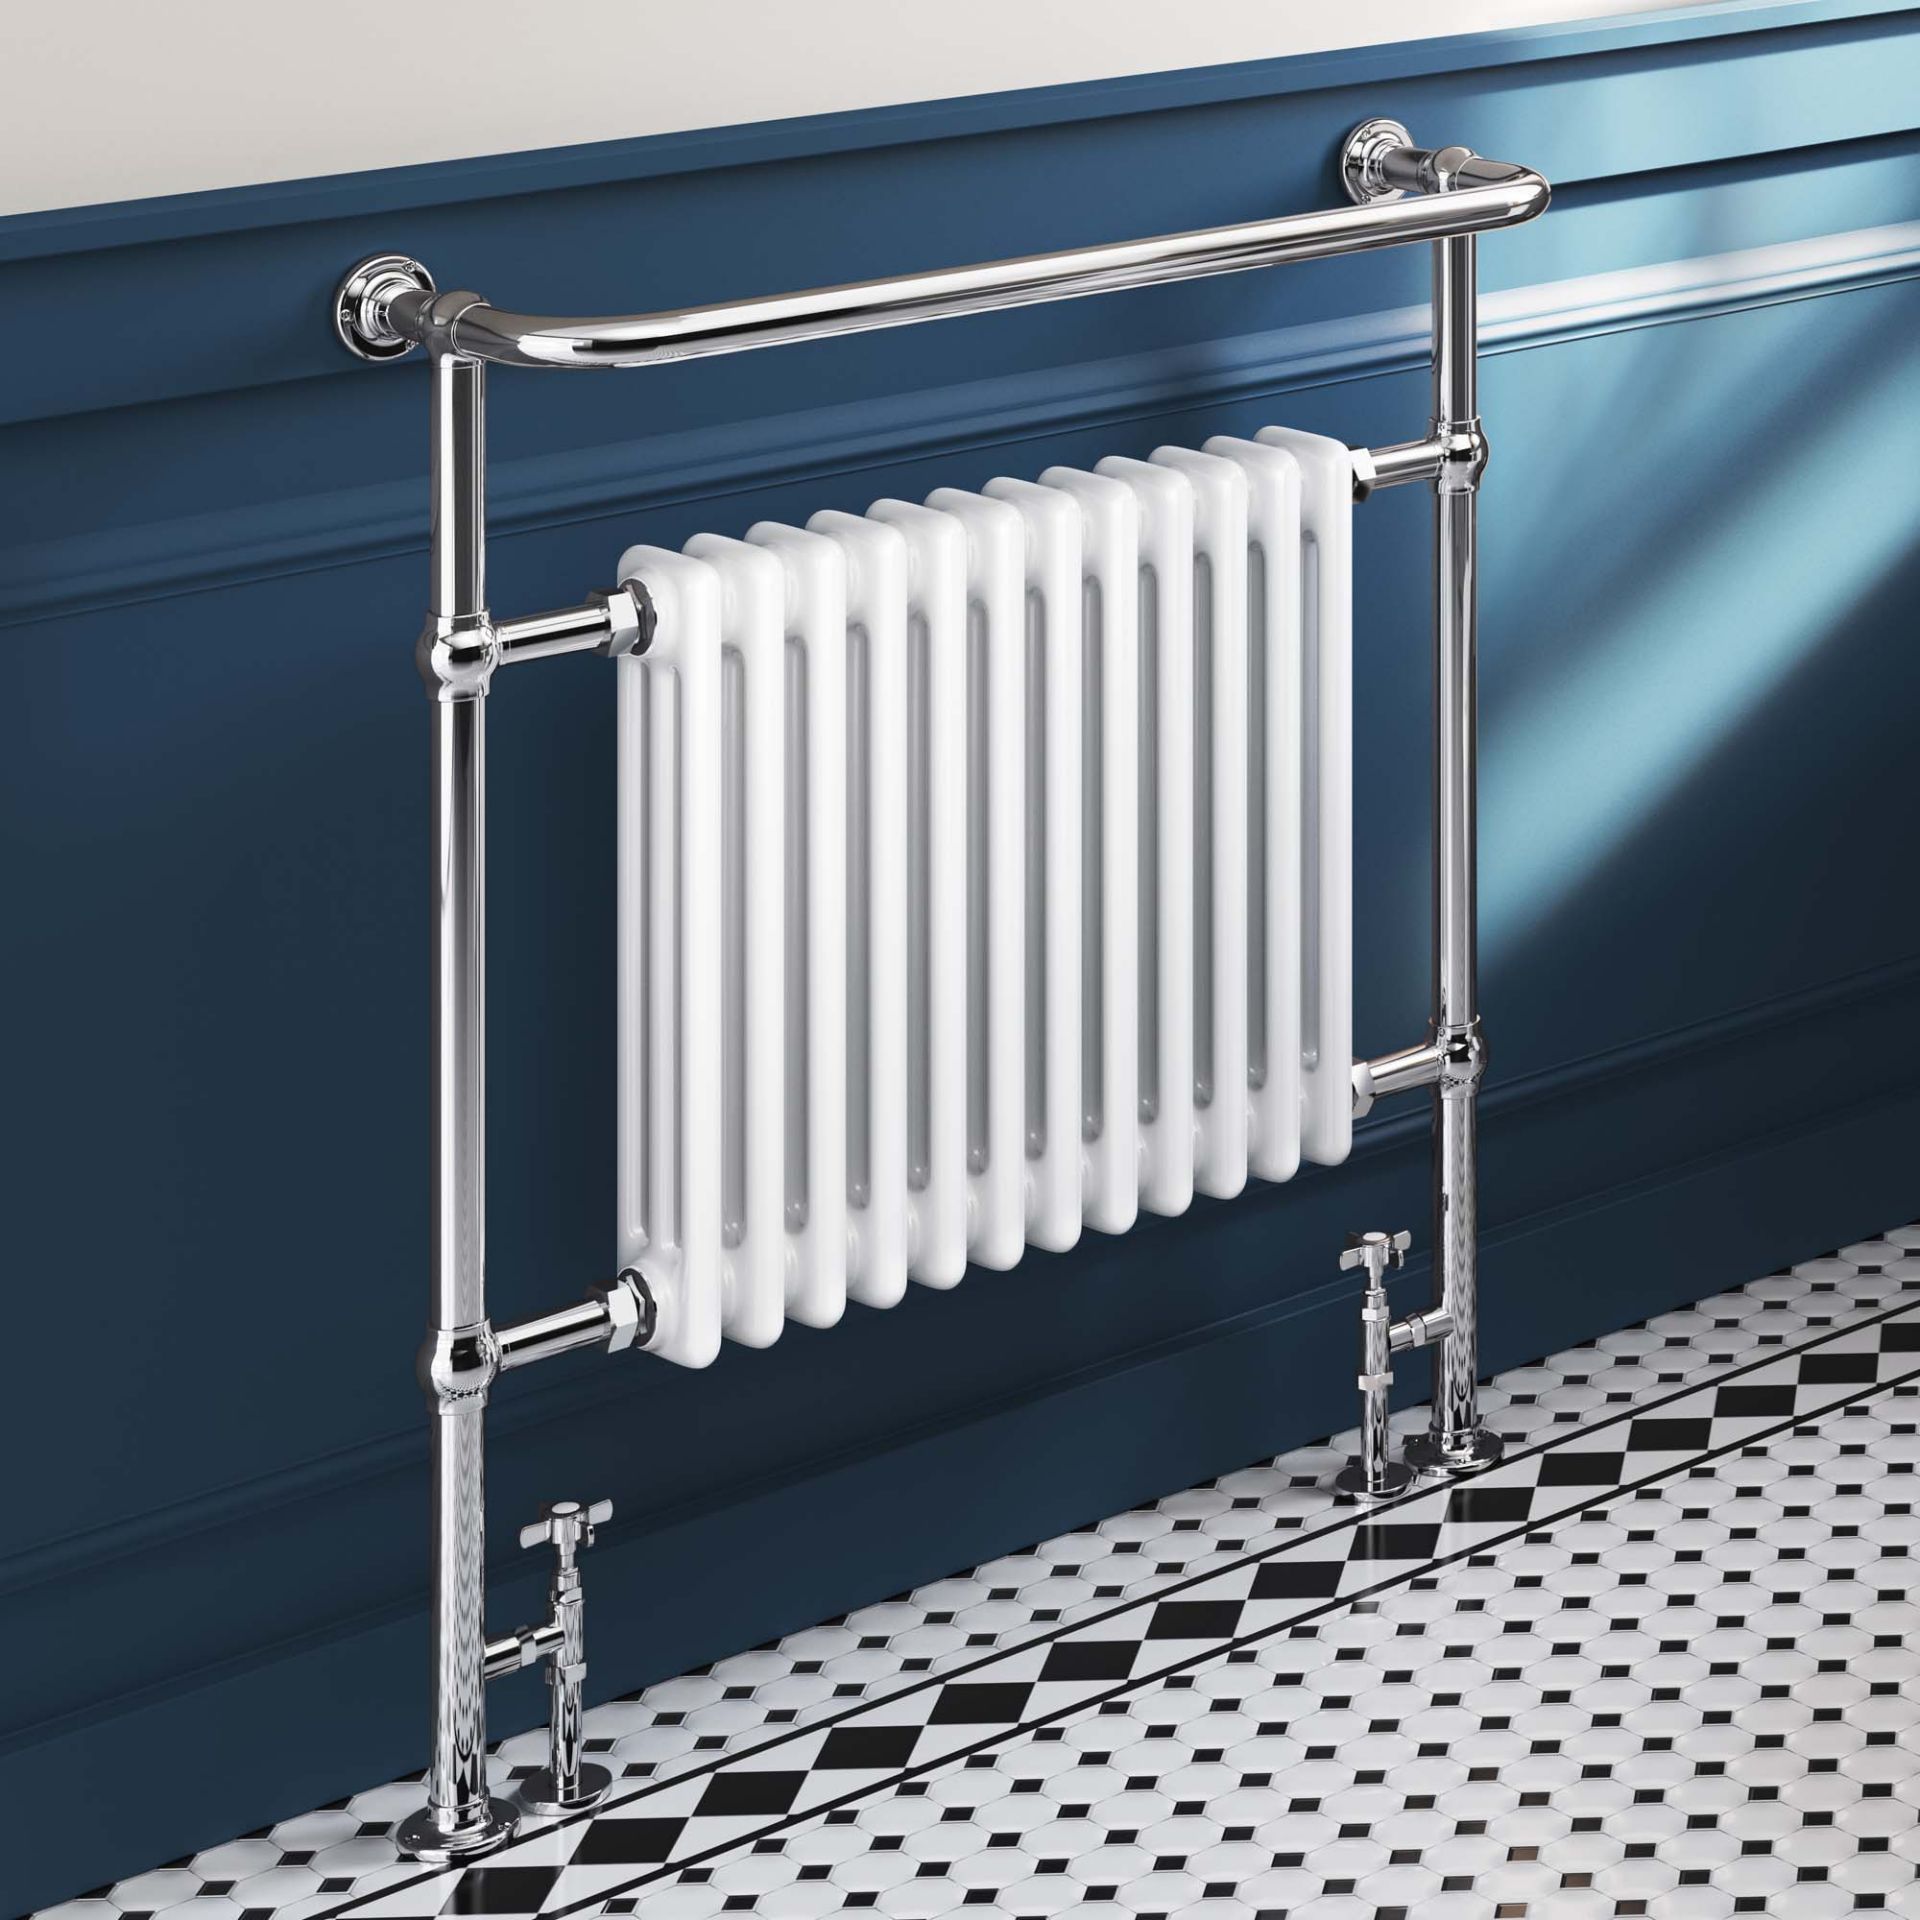 New & Boxed 952x839mm Large Traditional White Towel Rail Radiator - Victoria Premium. Rrp £431.99